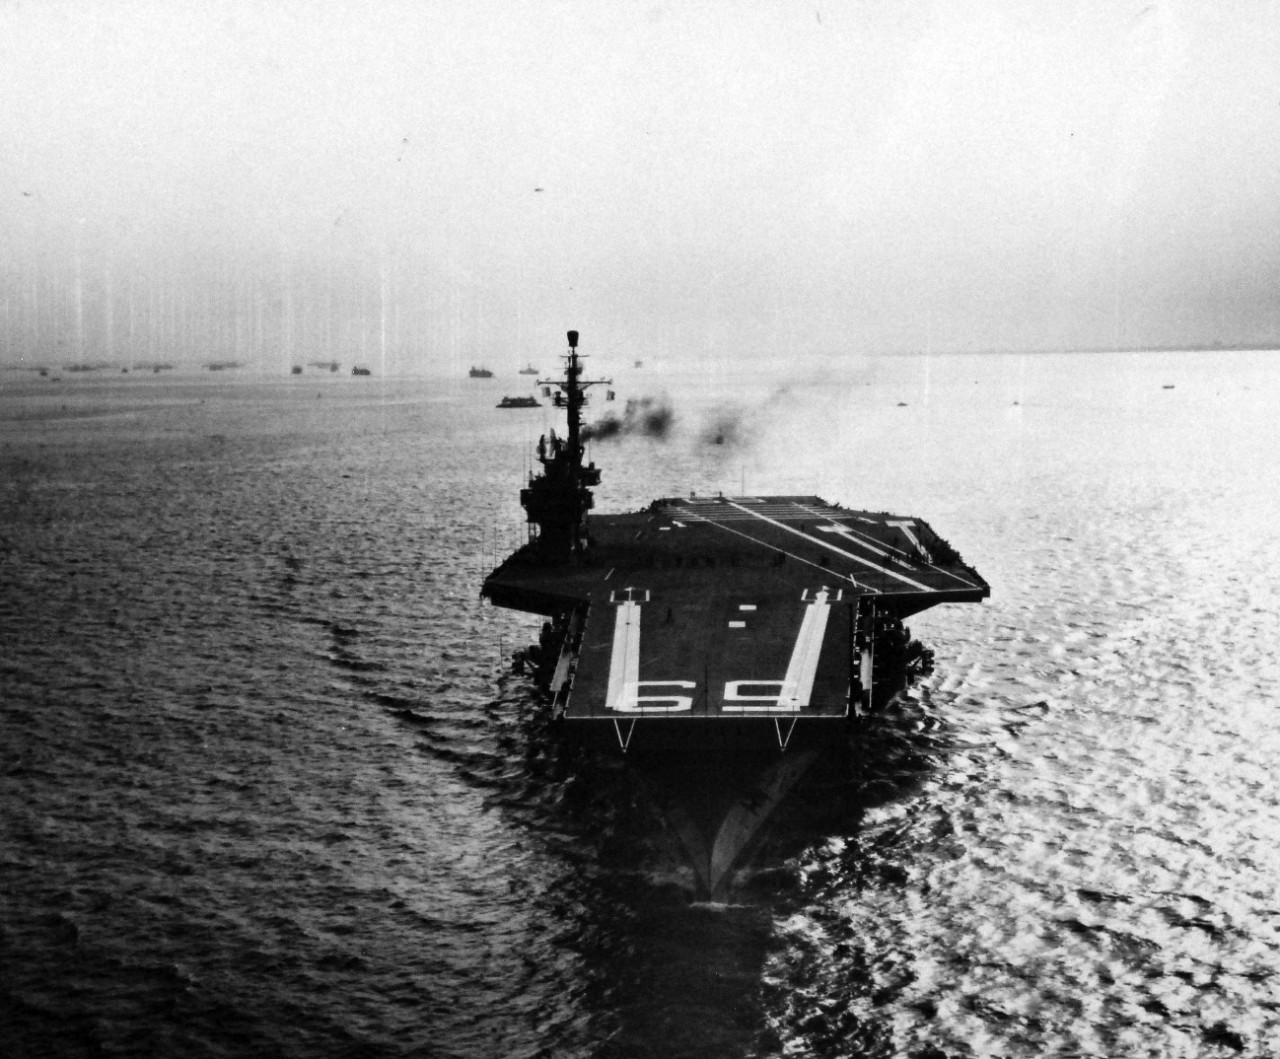 80-G-680082:   USS Forrestal (CVA-59), 1955.     The world’s largest naval vessel, the 59,650 tons in weight and 1,036 feet in length, USS Forrestal (CVA-59) pass through Hampton Roads on her way to the Atlantic for a five-day sea trial.  Underway on her own power, she left her pier at Newport News Shipyard at 3:00 pm for extensive tests on all her equipment and engines to satisfy the Navy’s Board of Inspection and Survey.   Photographed by PH2 R.P. Champine, 29 August 1955.   Official U.S. Navy Photograph, ow in the collections of the National Archives.   (2014/04/03).  